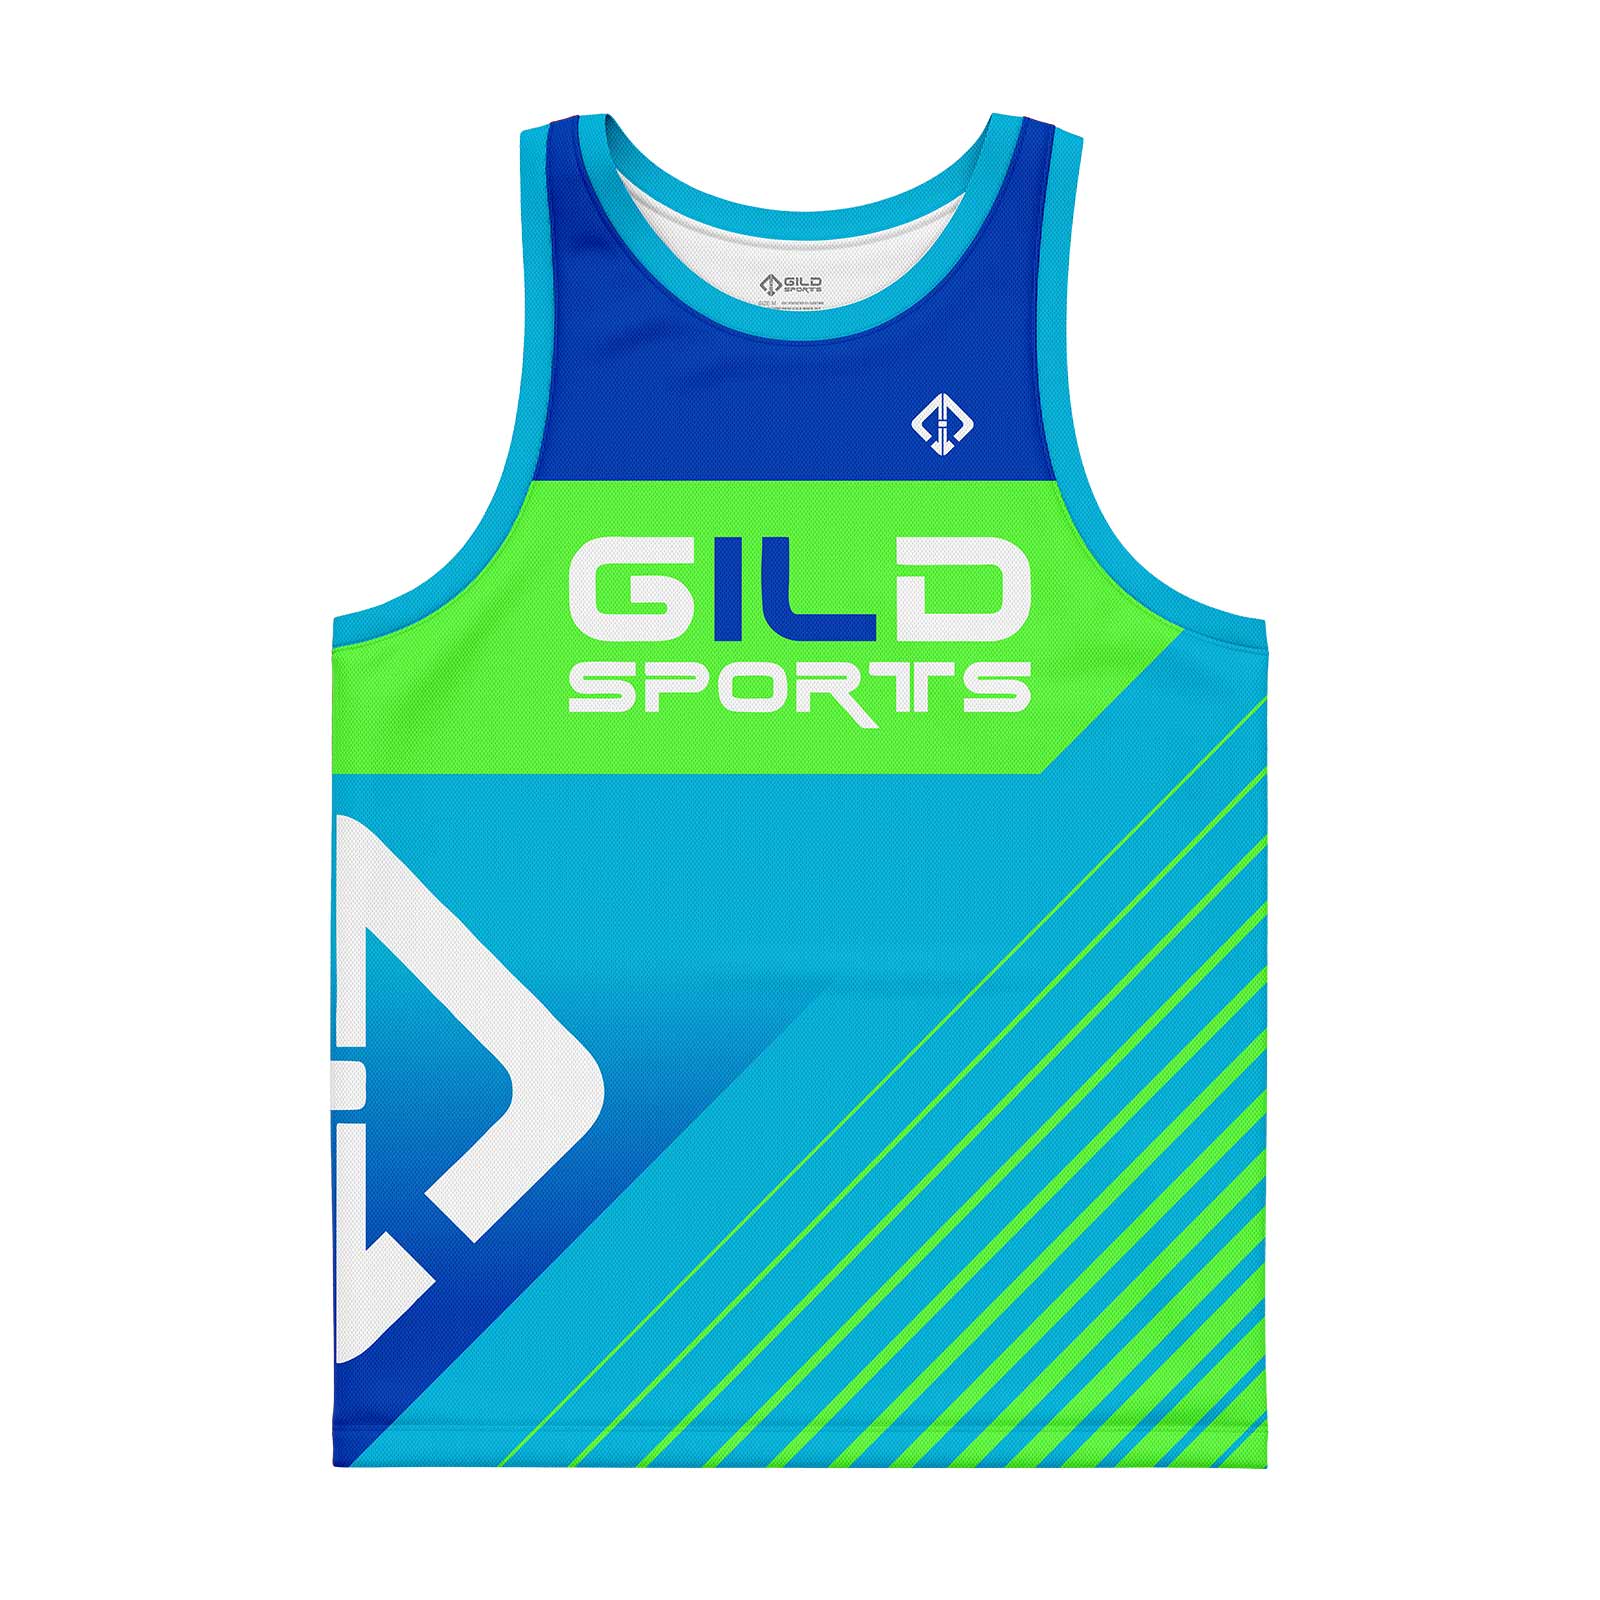 "Green Lacrosse Pinnies Front View" image displaying a selection of vibrant green lacrosse pinnies